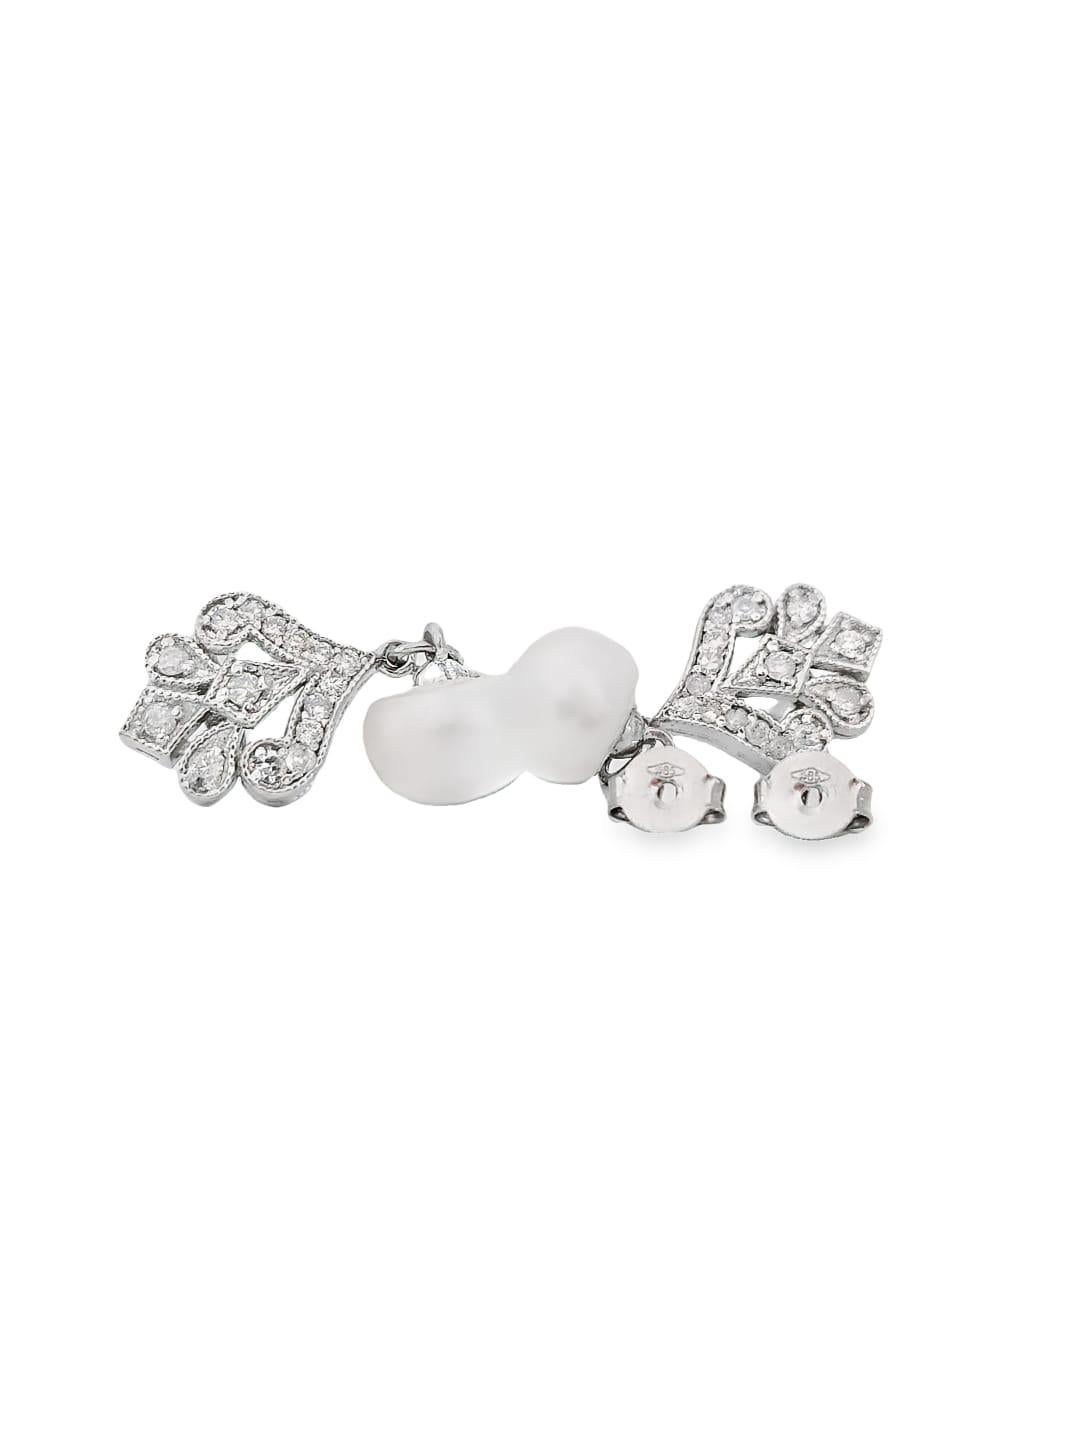 Pearls Earrings with Diamonds  For Sale 2